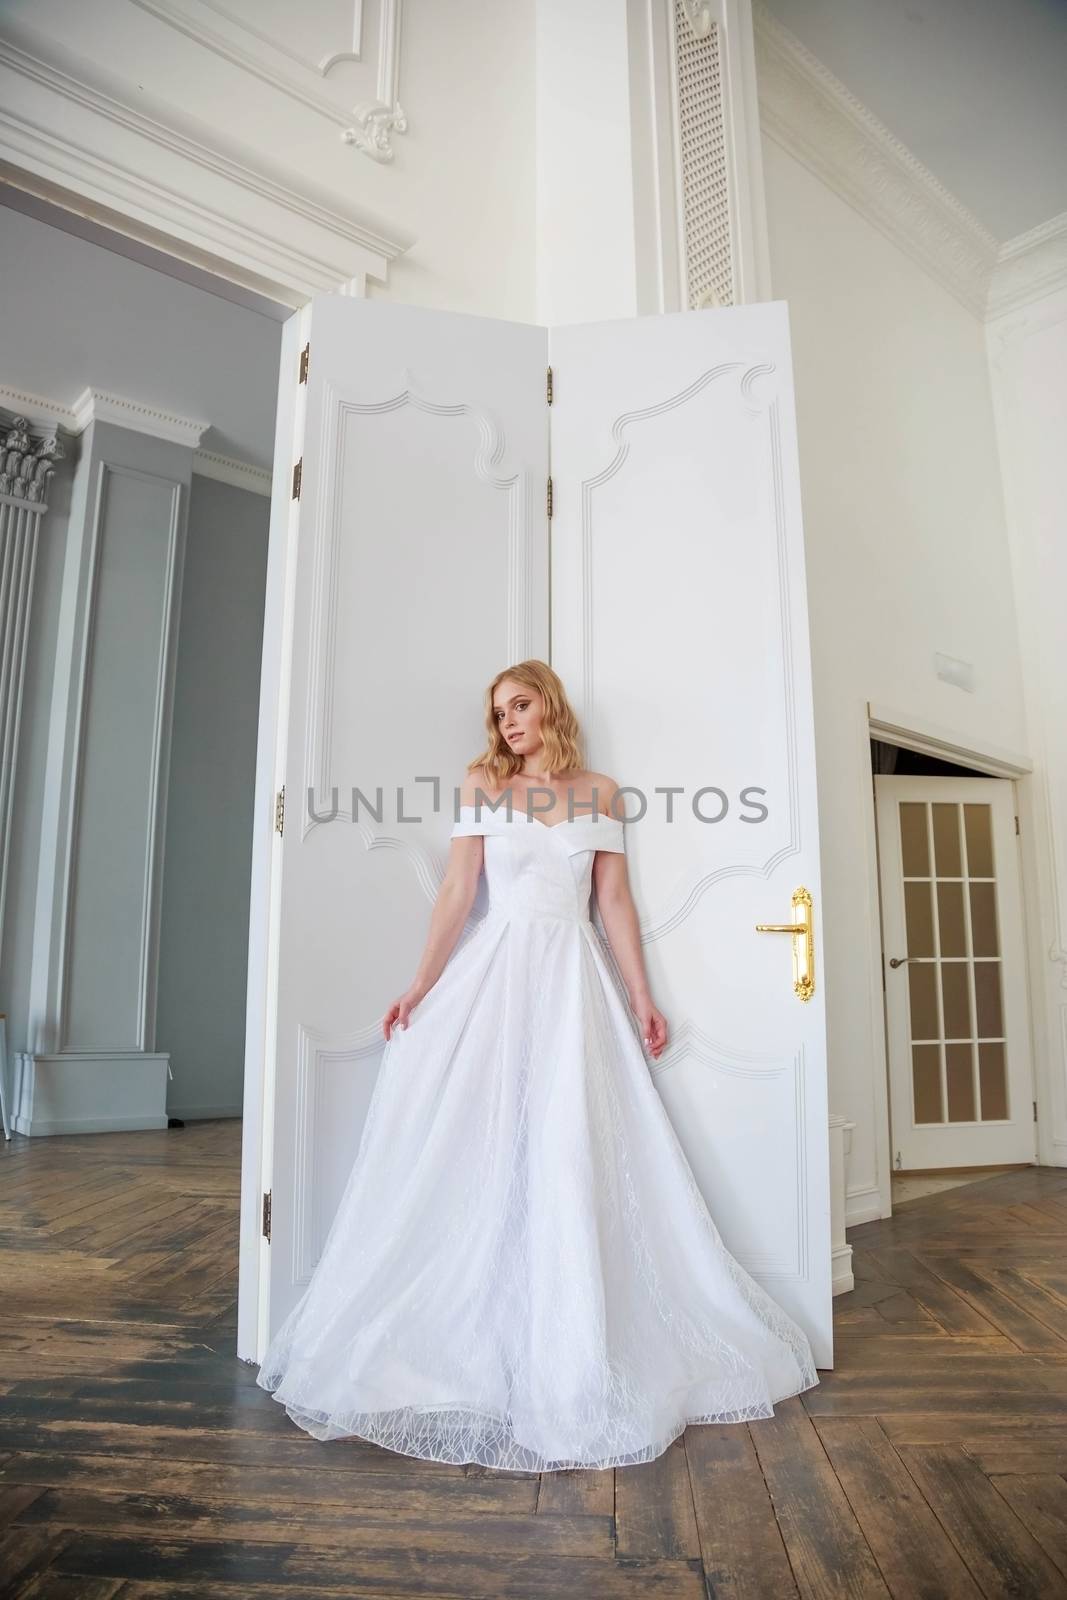 A bride in a chic wedding dress stands near the door and looks to the side by galinasharapova